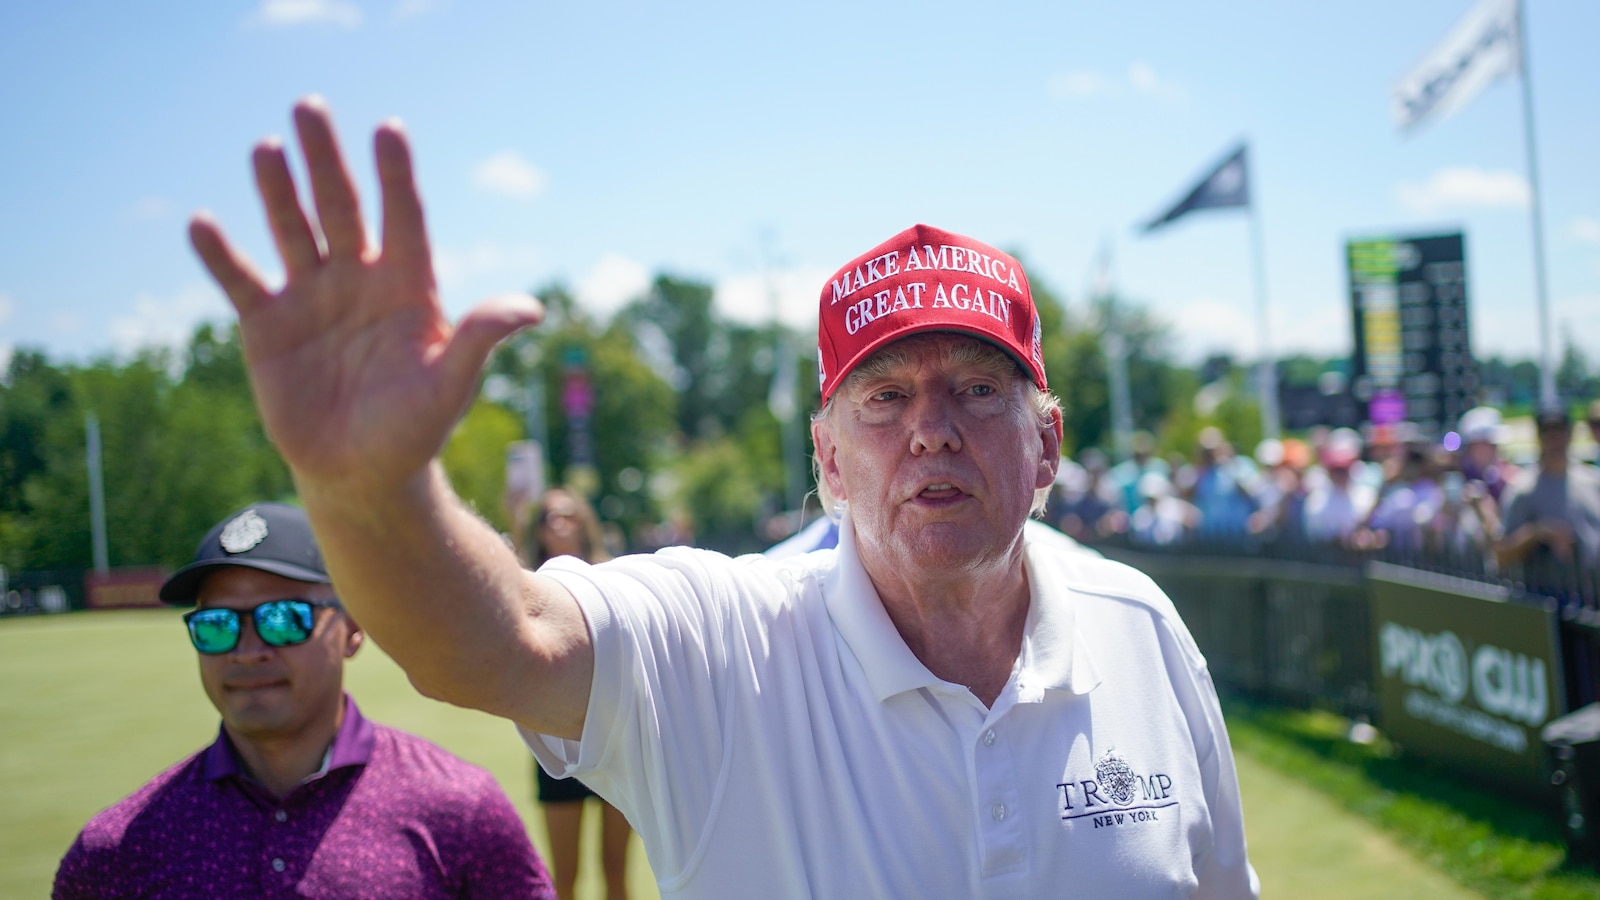 Trump's company: investigation into New Jersey golf club liquor license does not apply to ex-president